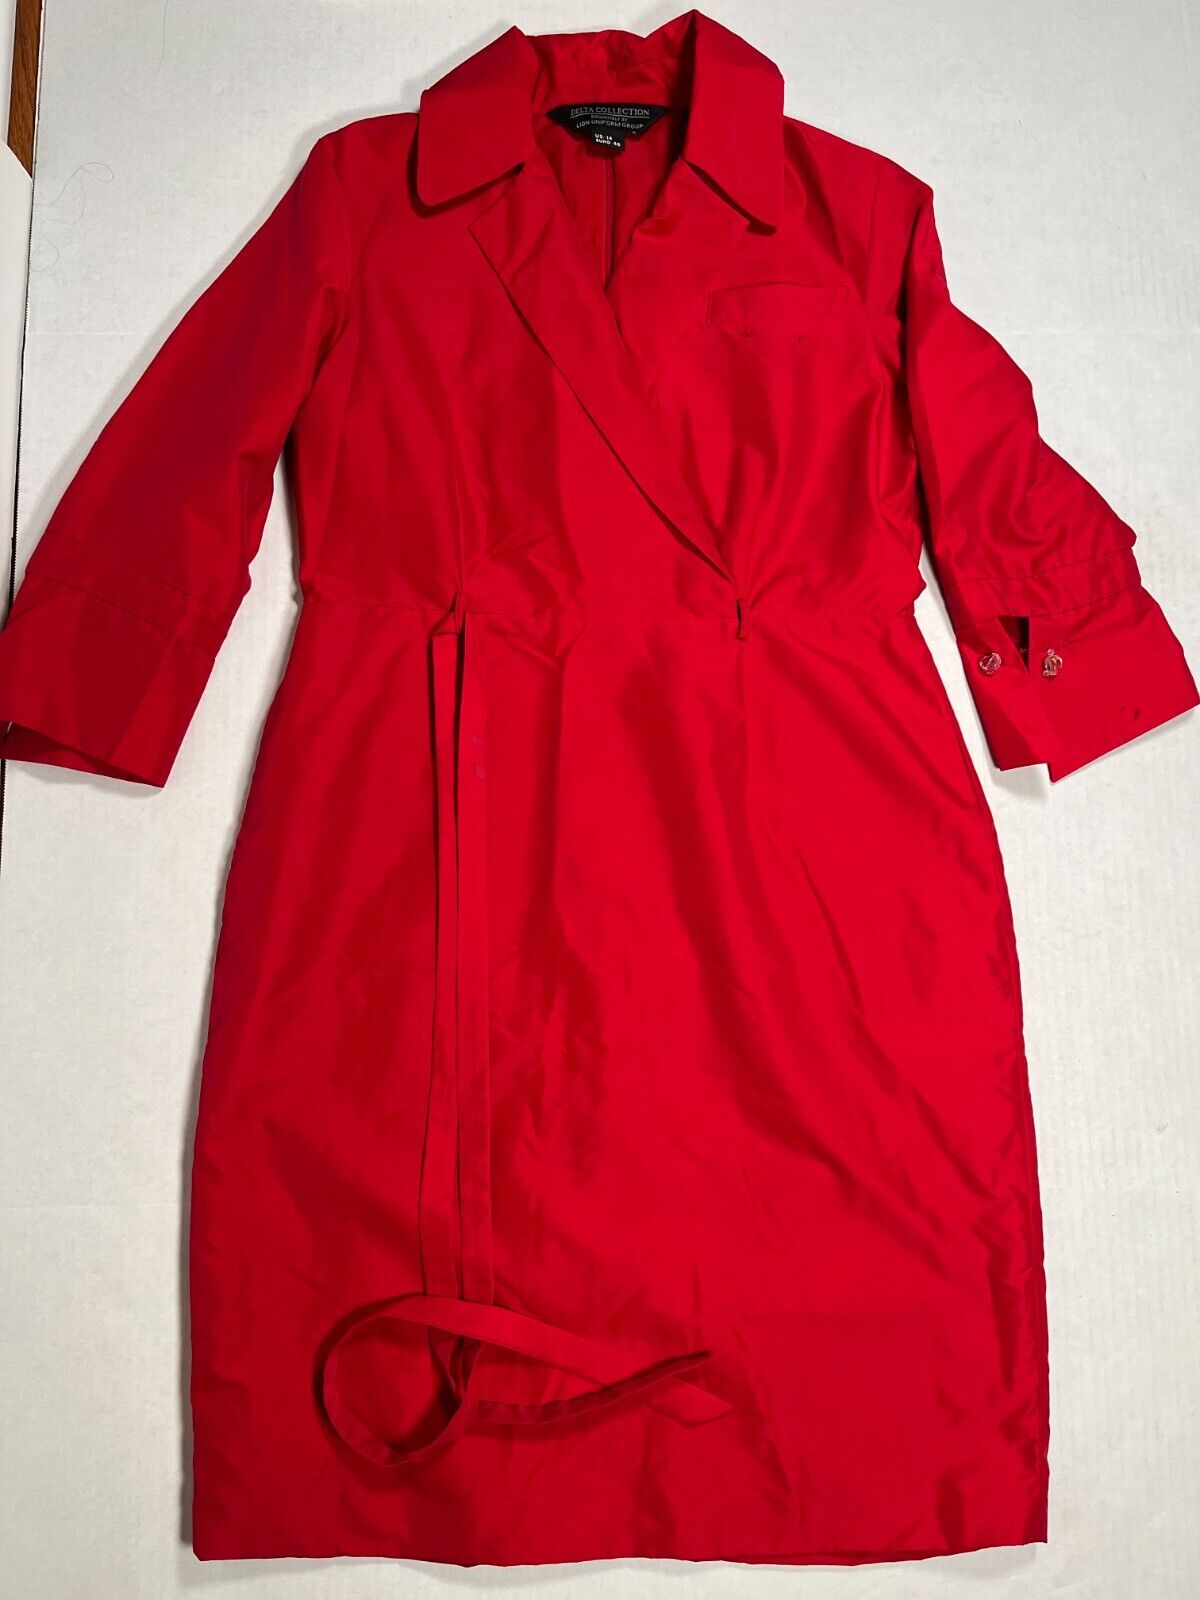 DELTA AIRLINES COLLECTION Uniform Flight Attendant Red Dress with Belt Size 14